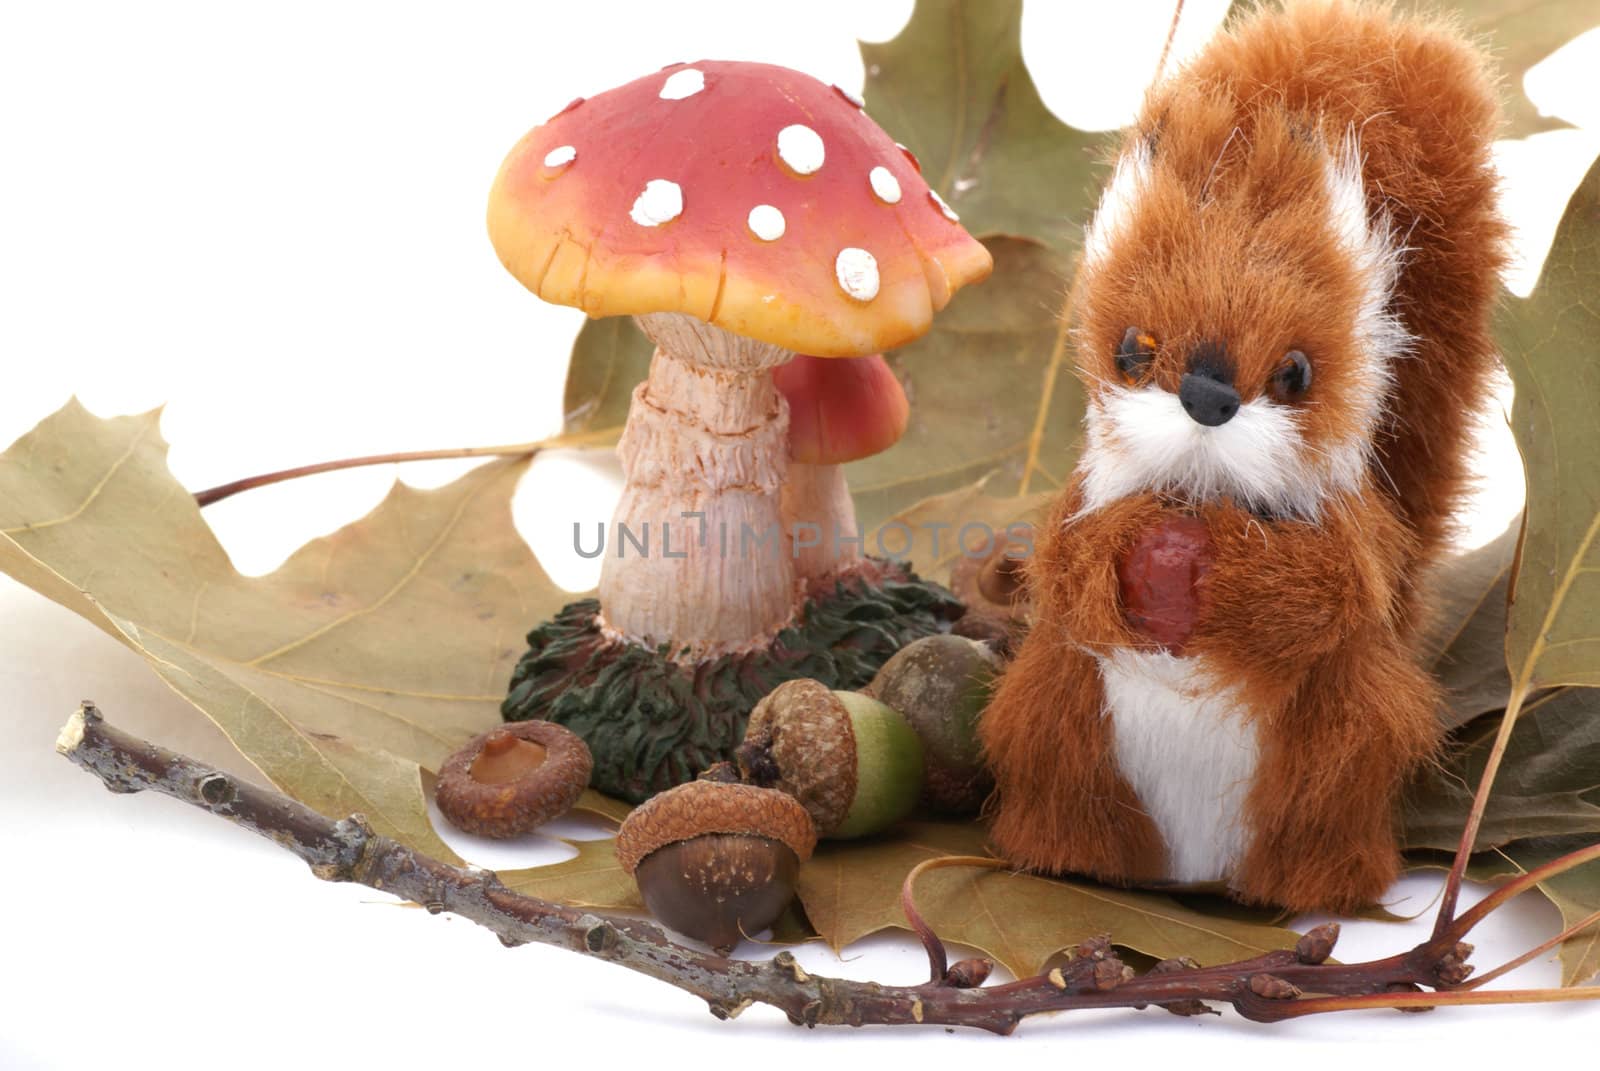 Toadstool, squirrel, acorn and some leaves, isolated on white background.